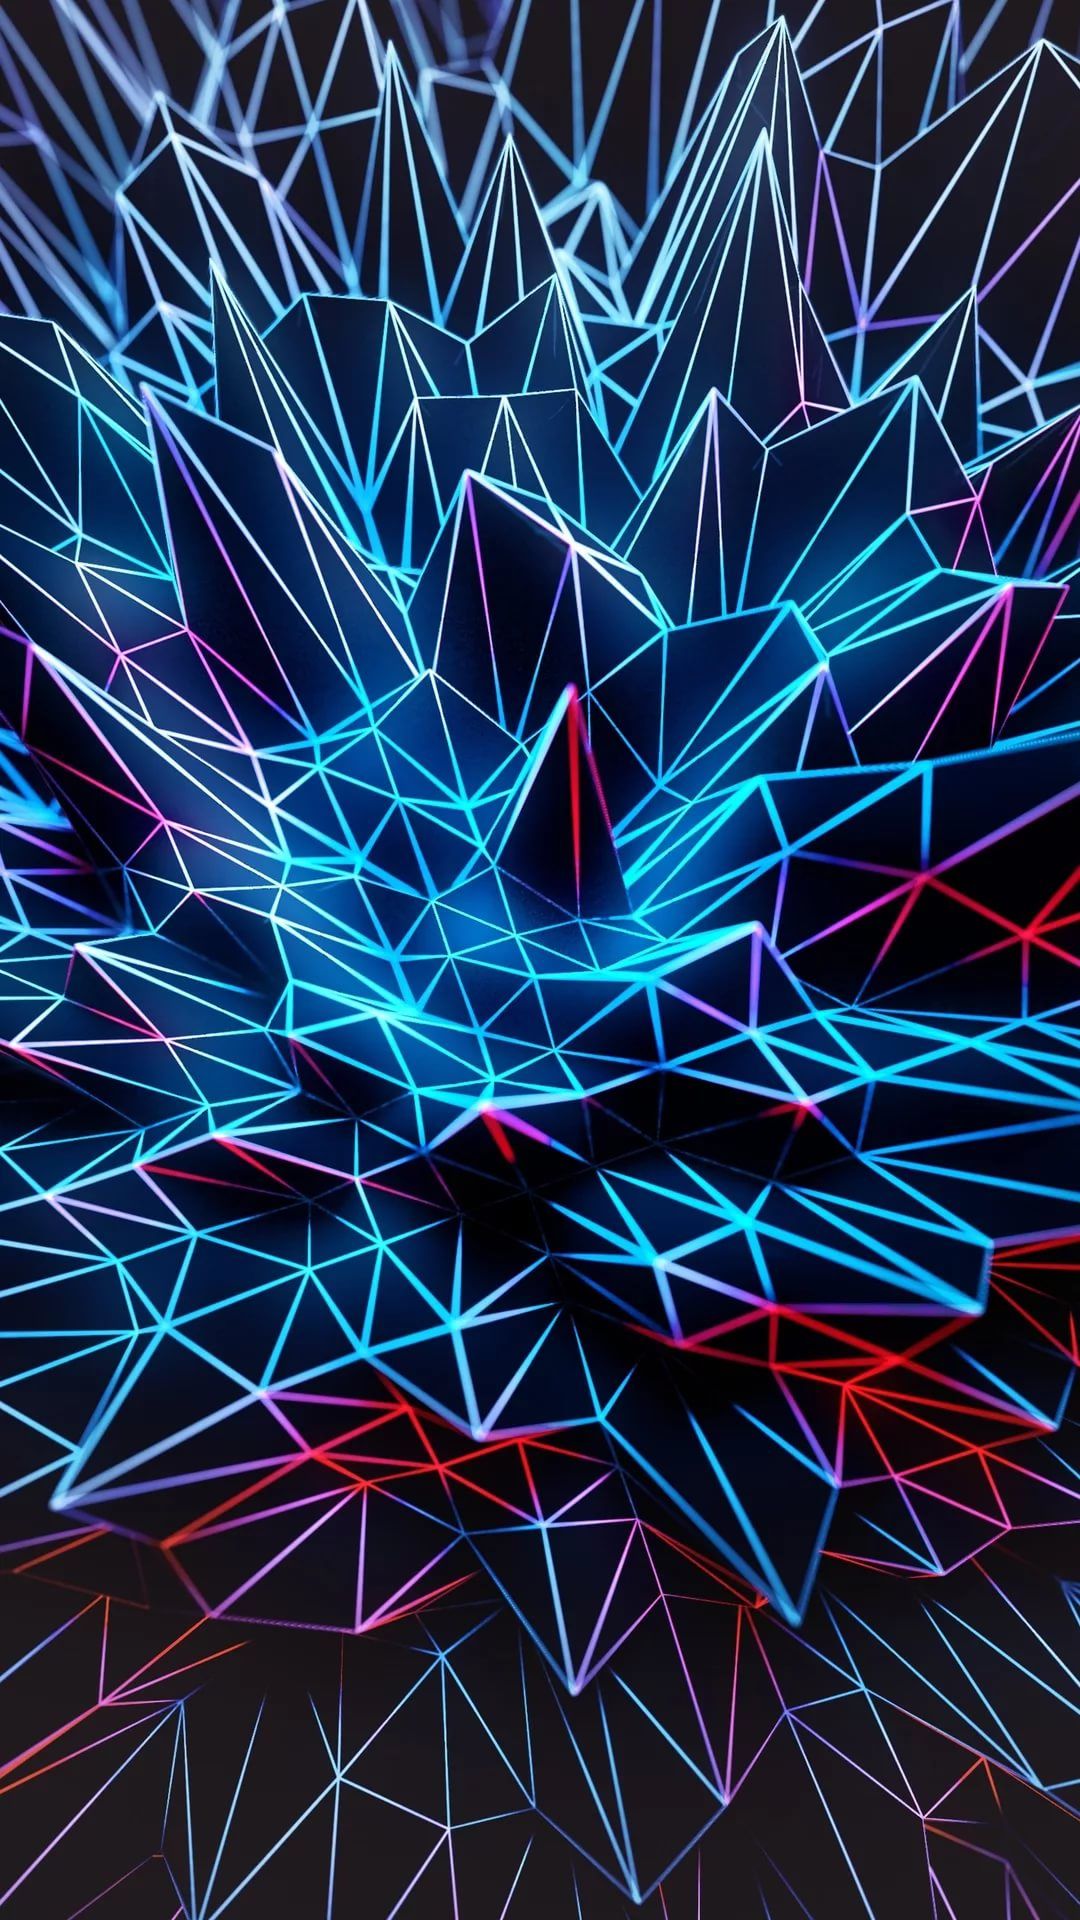 Abstract Iphone Wallpapers Iphone12 スマホ壁紙 待受画像ギャラリー